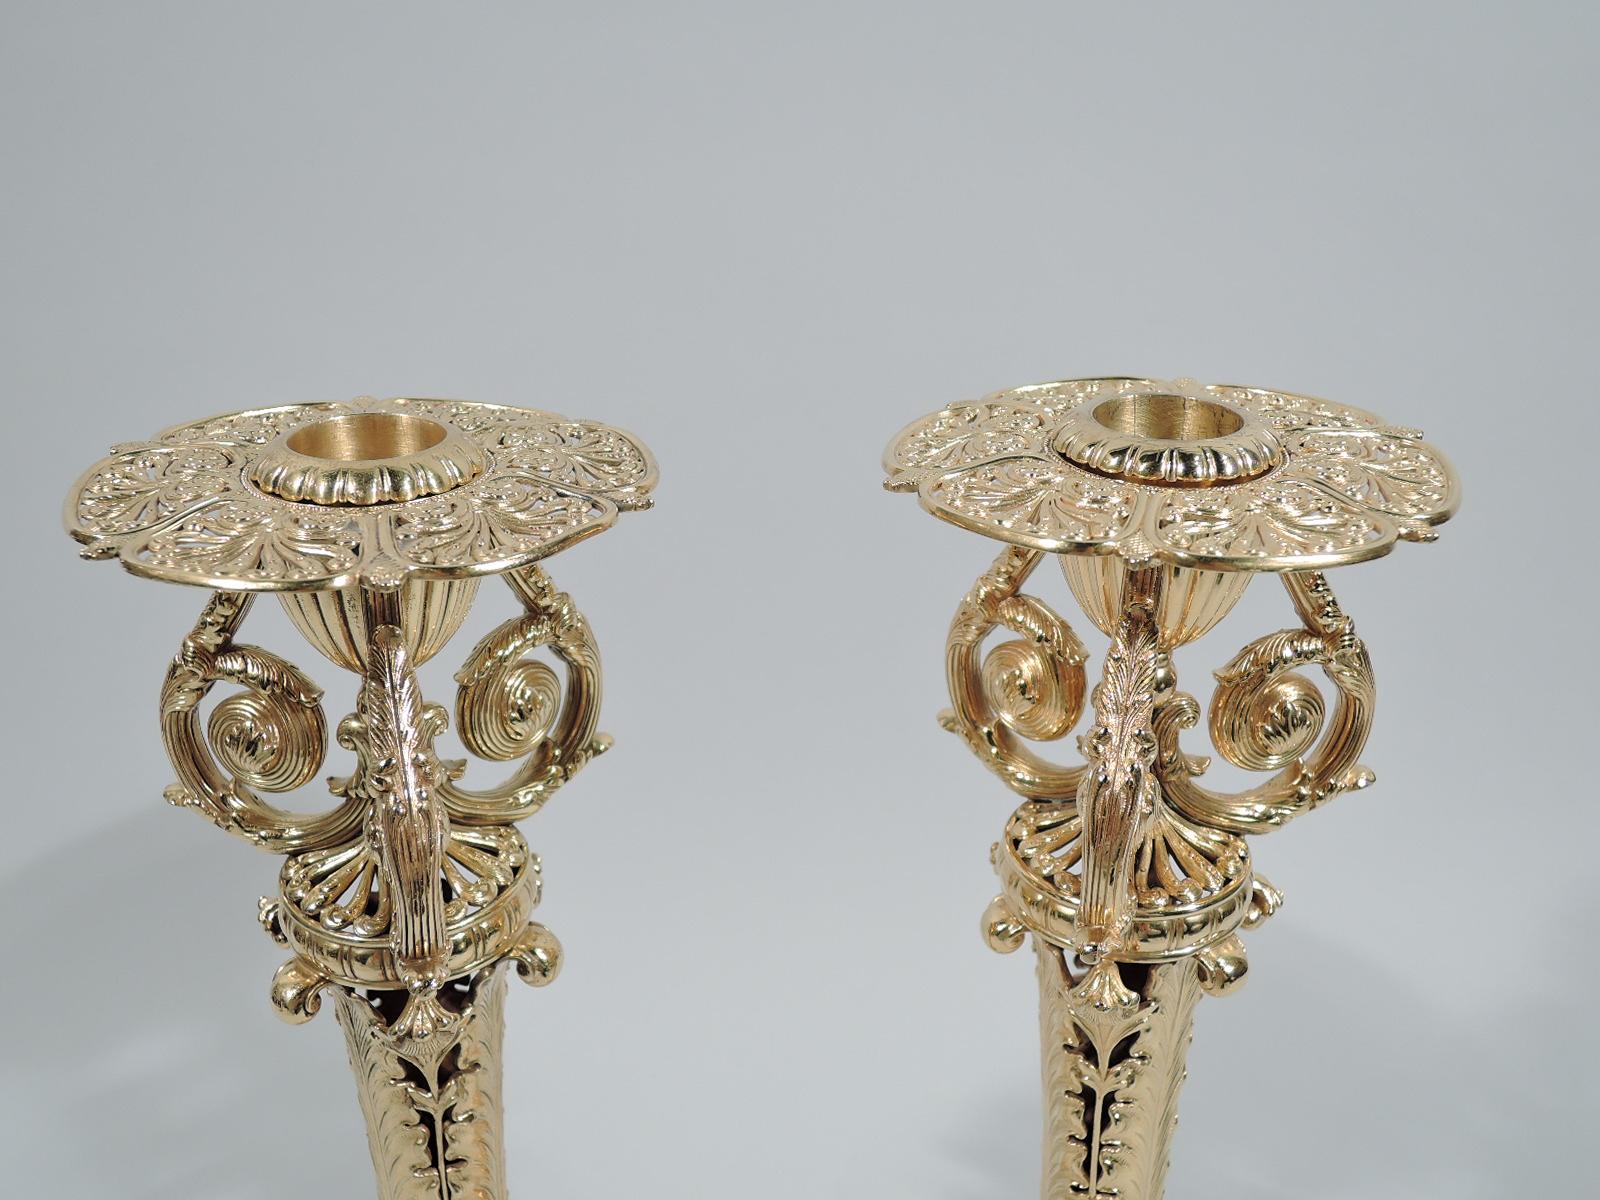 American Pair of Tiffany Exuberantly Classical Paris Exposition Universelle Candlesticks